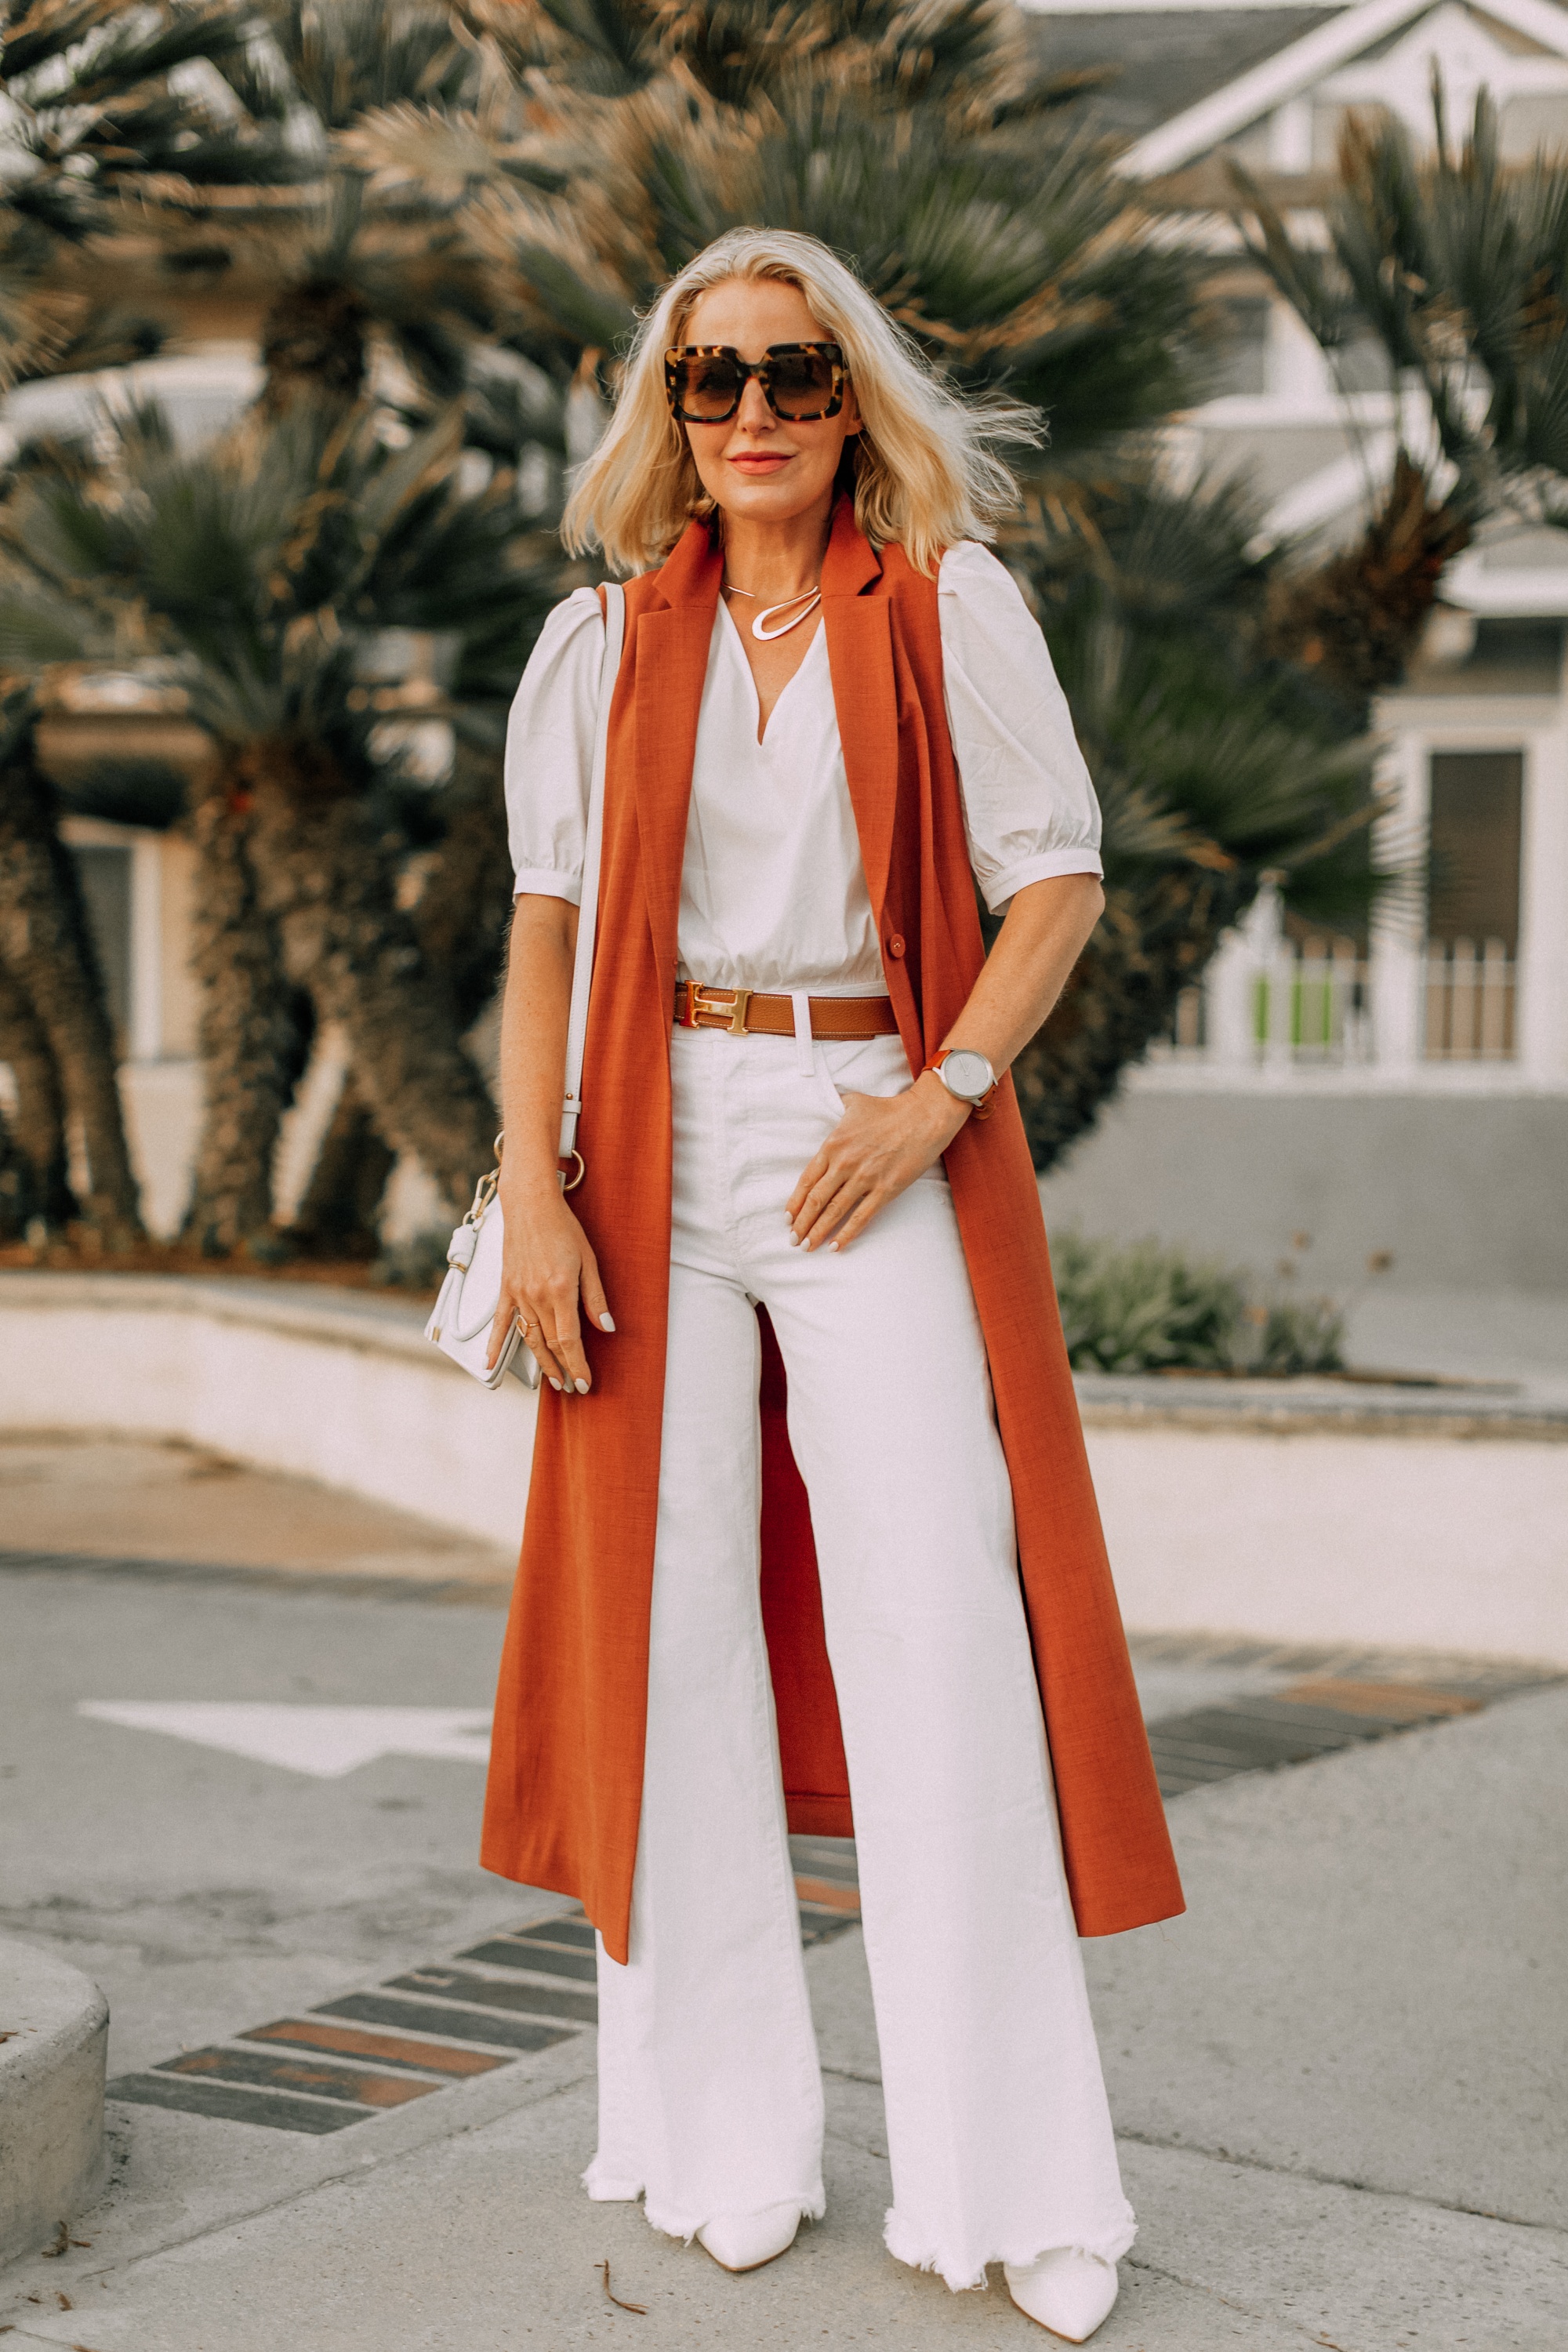 fashion blogger busbee style showing how to wear long vest with all white outfit and hermes belt